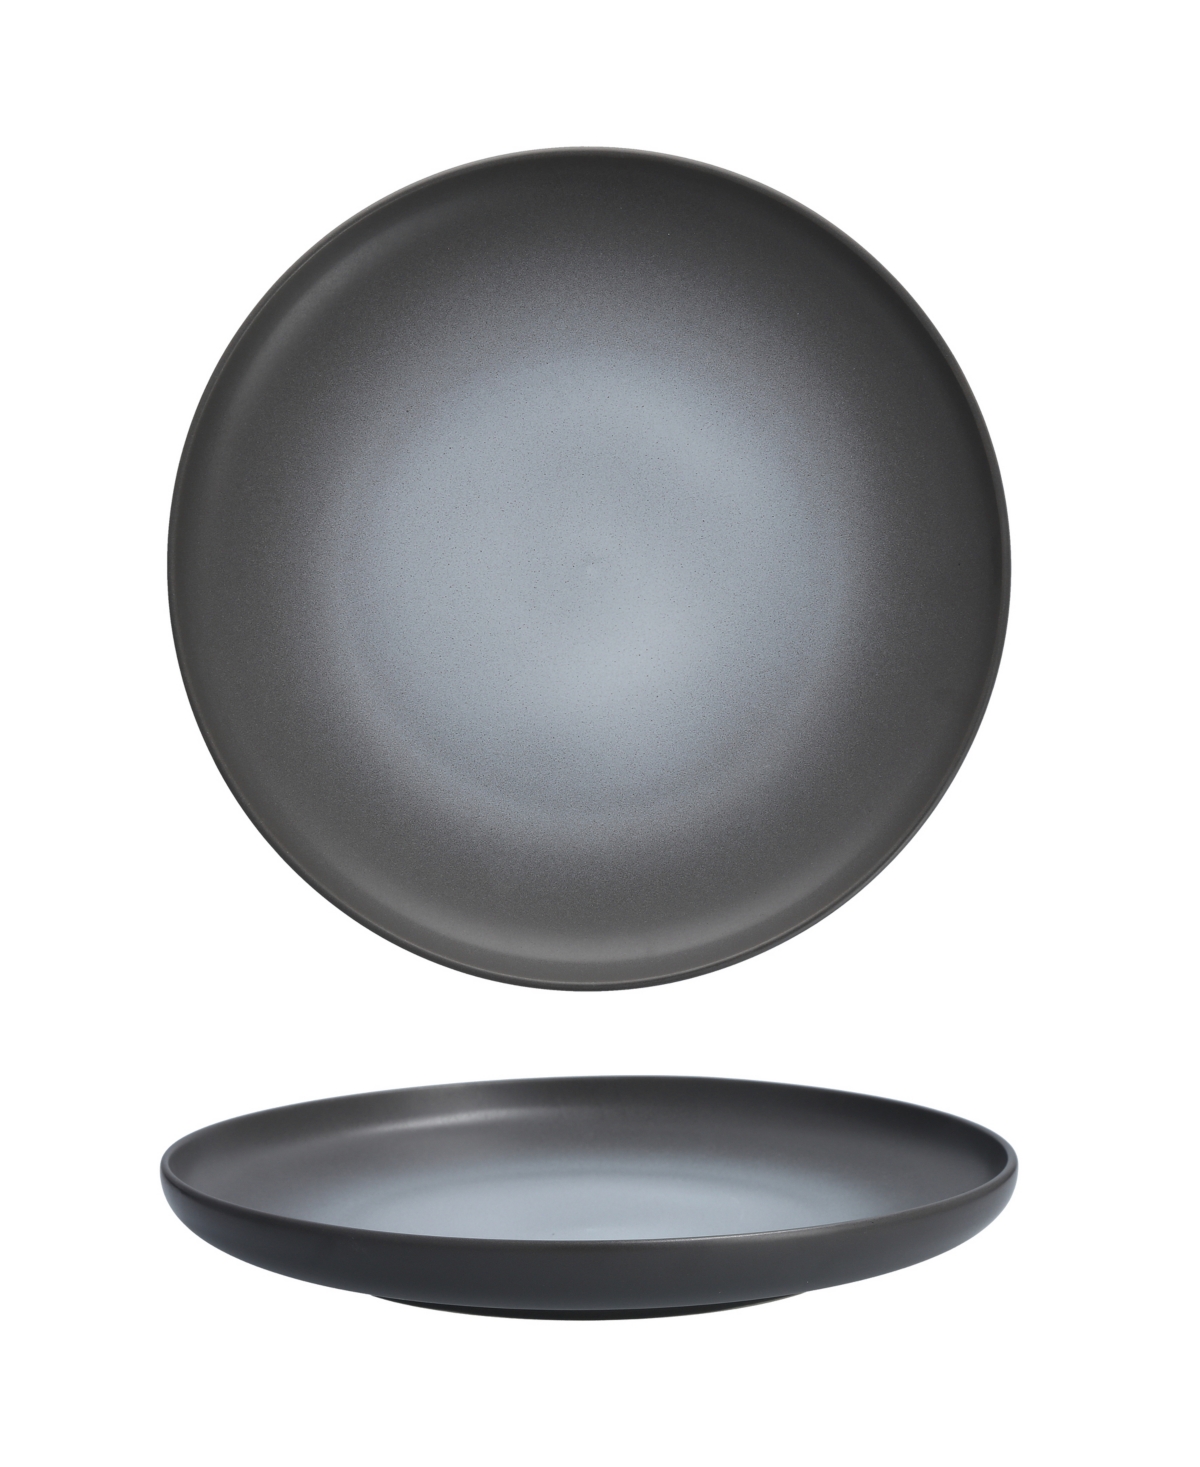 Cloud Terre Hugo Large Coupe Plates, Set of 4 - Charcoal